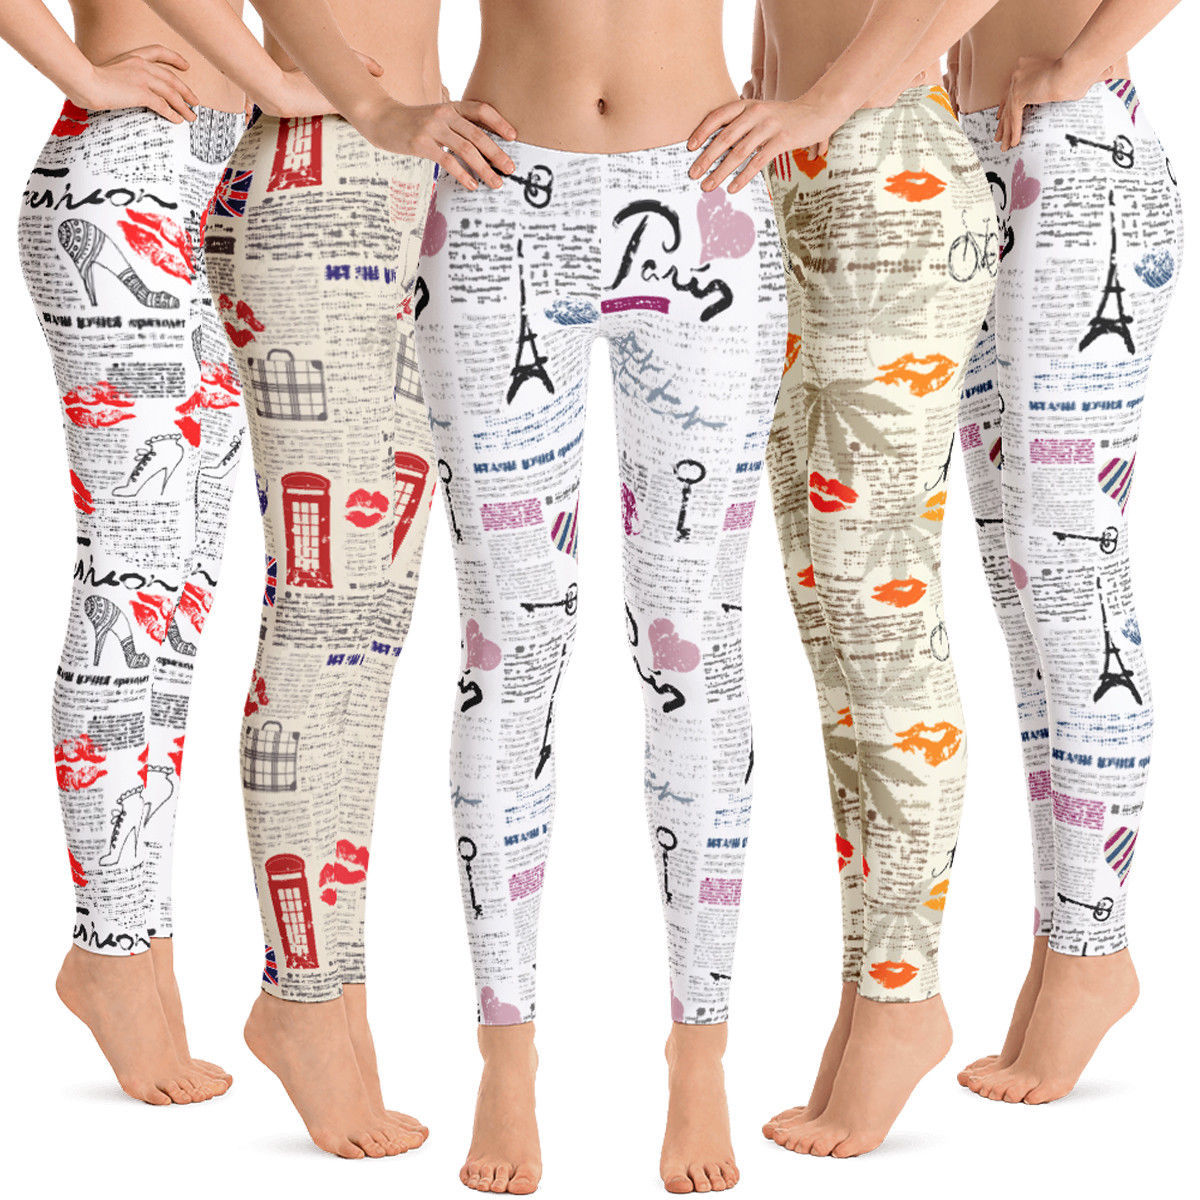 news paper leggings collection - premium women's leggings outfits gift for her